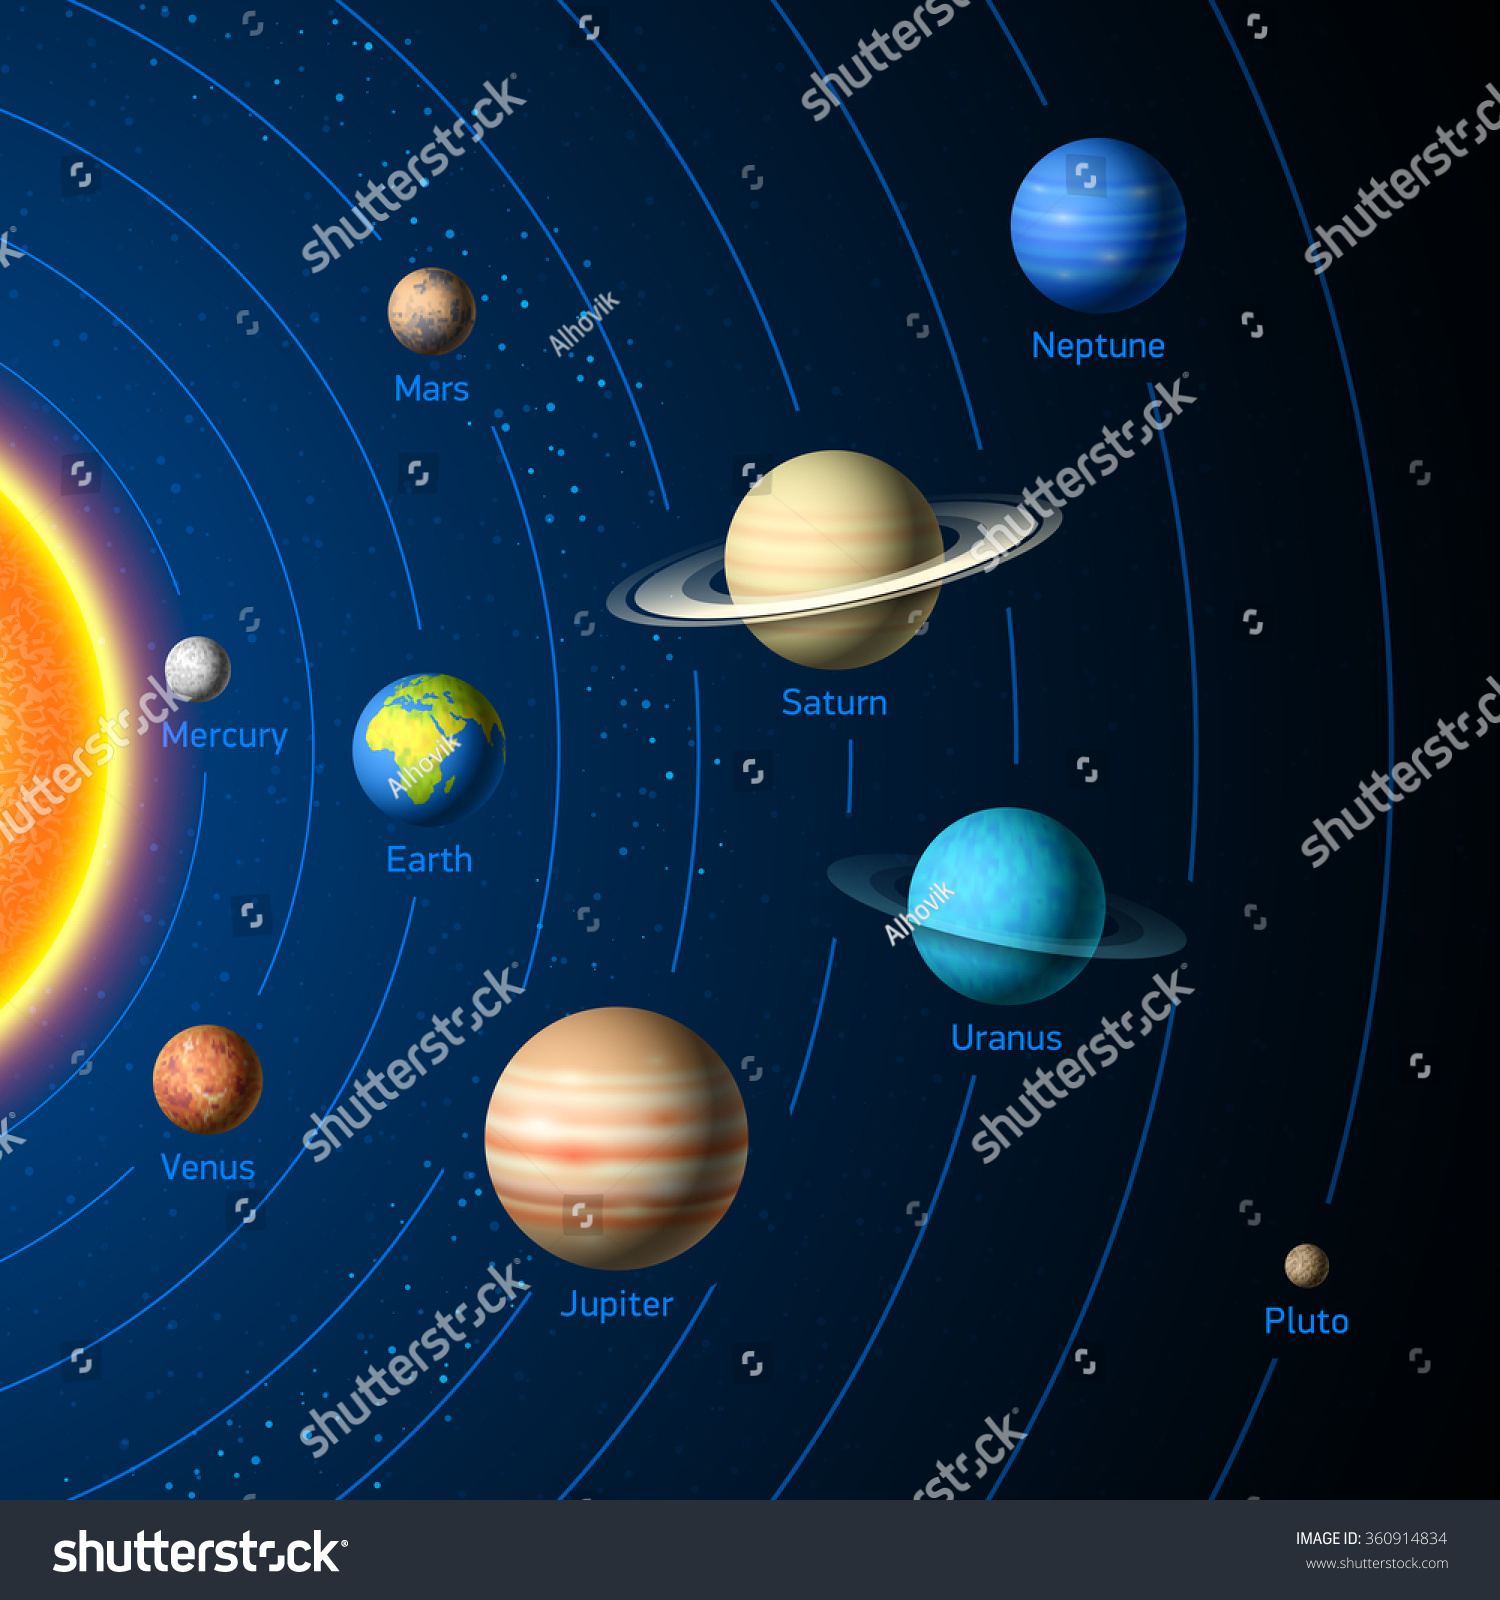 Solar System Planets Vector Stock Vector (Royalty Free) 360914834 ...